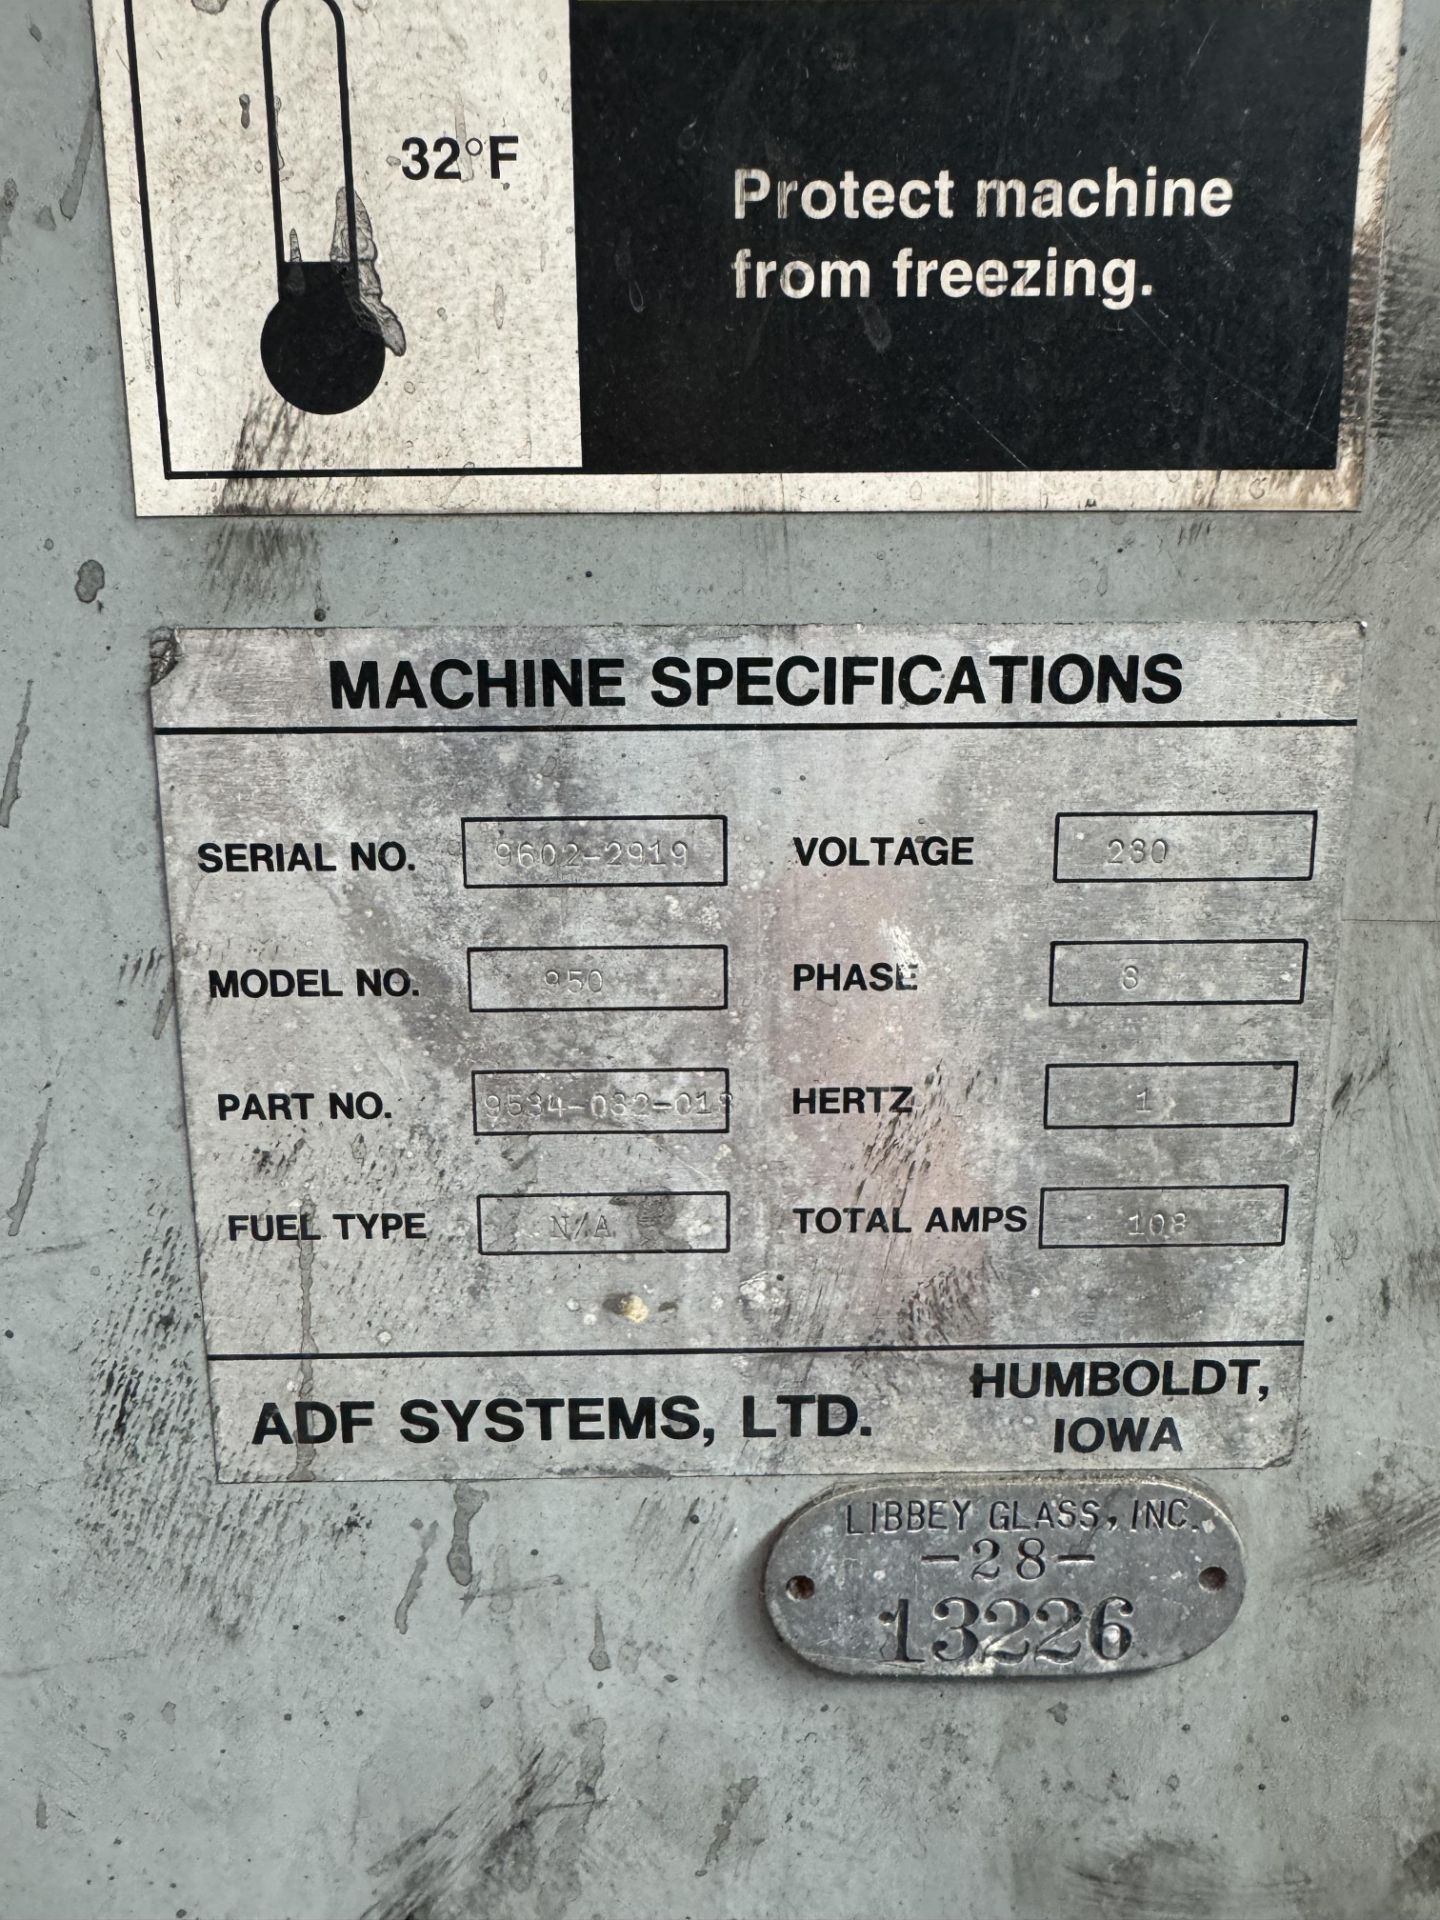 ADF Systems Parts Washer, Model# 950, Serial# 9602-2919, 230V, Rigging/ Removal Fee - $650 - Image 4 of 5